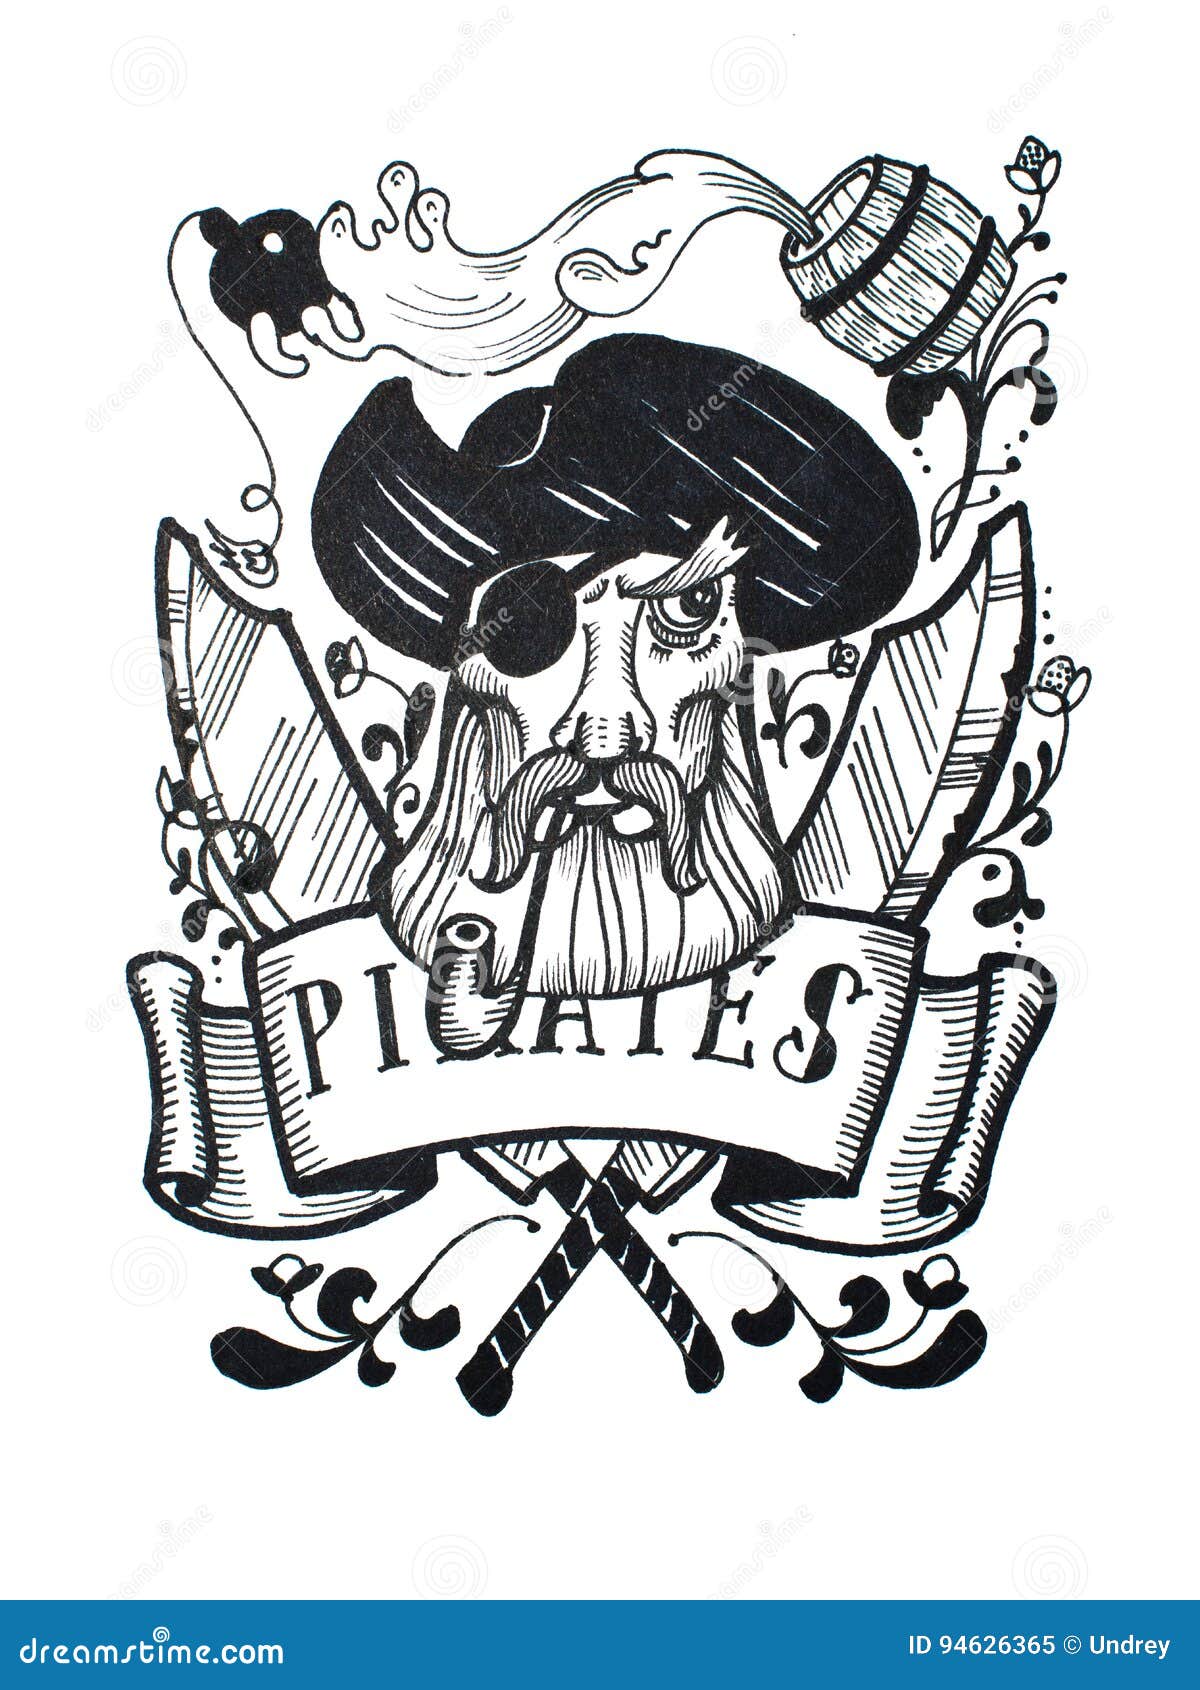 Pen and Ink Vintage Drawing of Pirate Captain for Tattoo or T-shirt Design  Stock Illustration - Illustration of handdrawn, sailor: 94626365